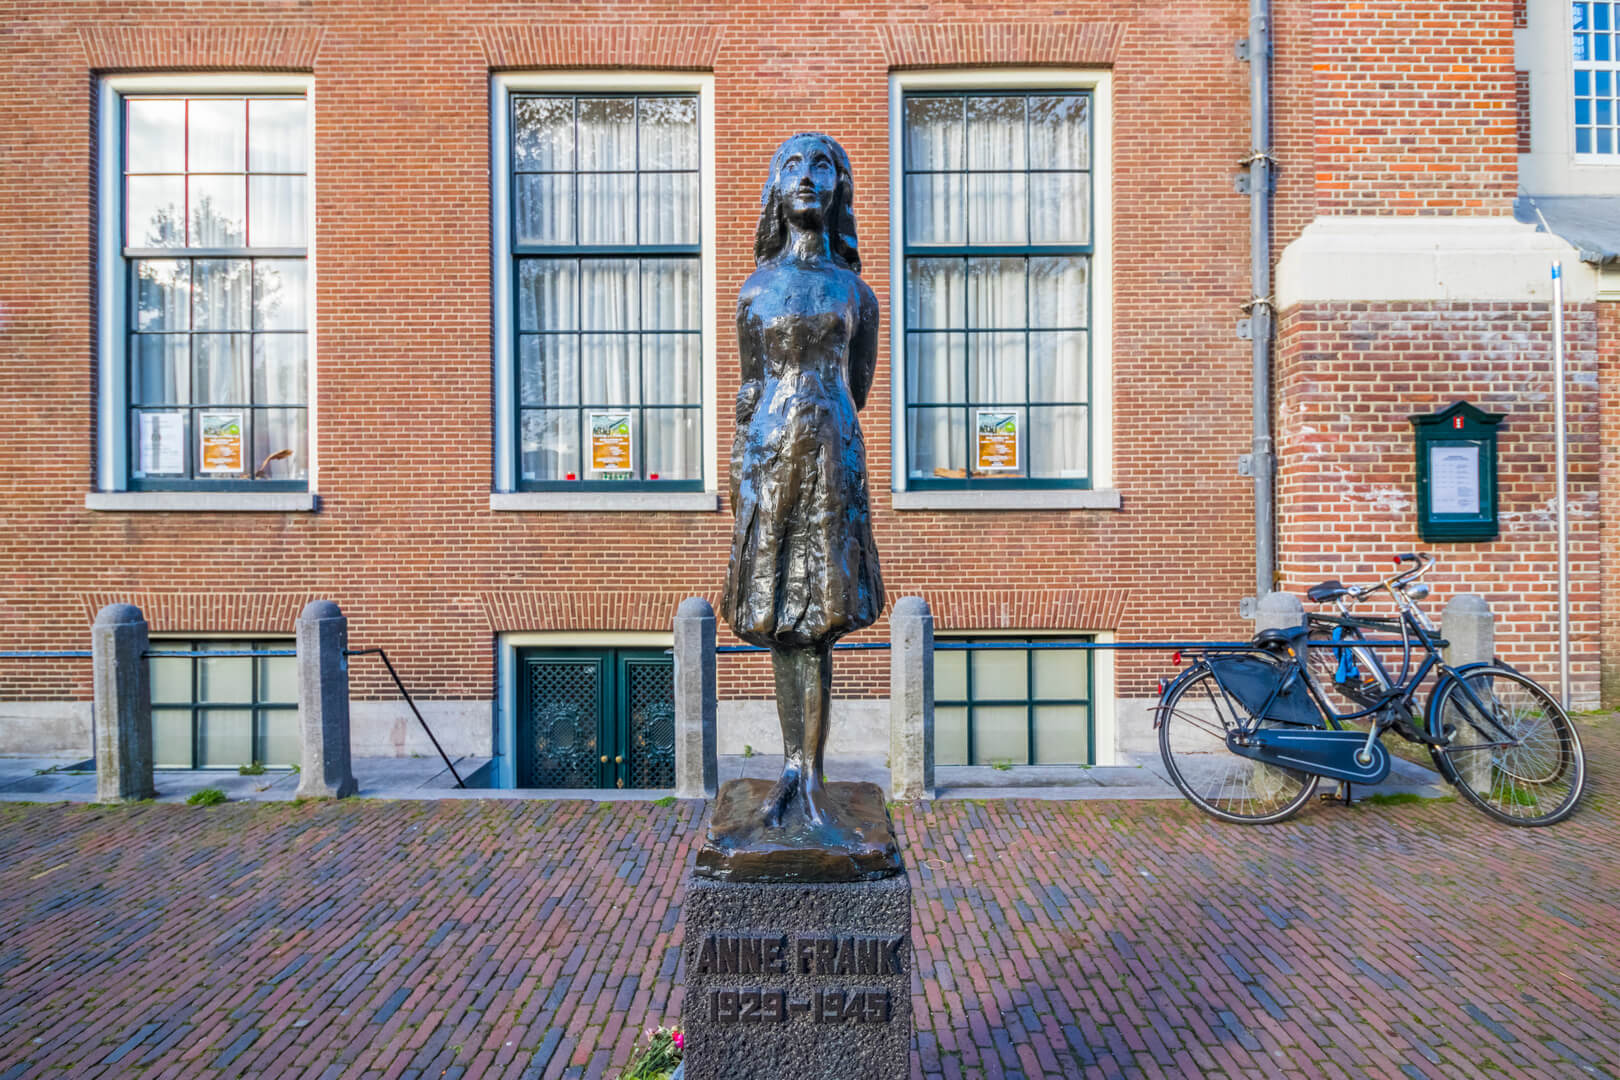 Amsterdam, Netherlands: Statue of Anne Frank by Pieter d'Hont, next to Anne Frank Huis.